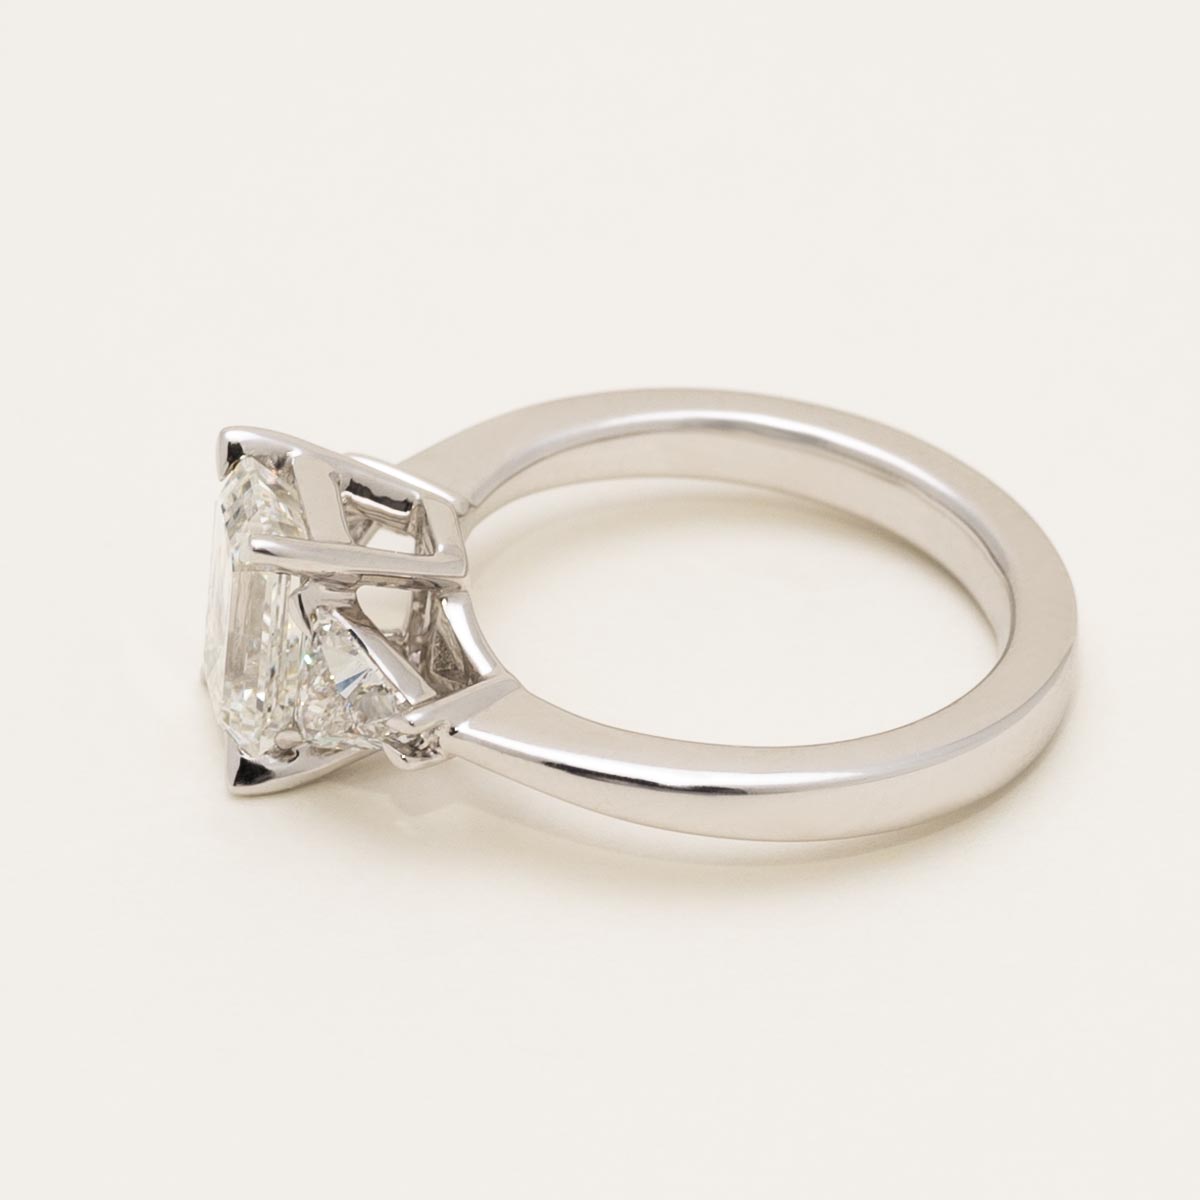 Lab Grown Emerald Cut and Trillion Diamond Engagement Ring in 14kt White Gold (2 3/4ct tw)